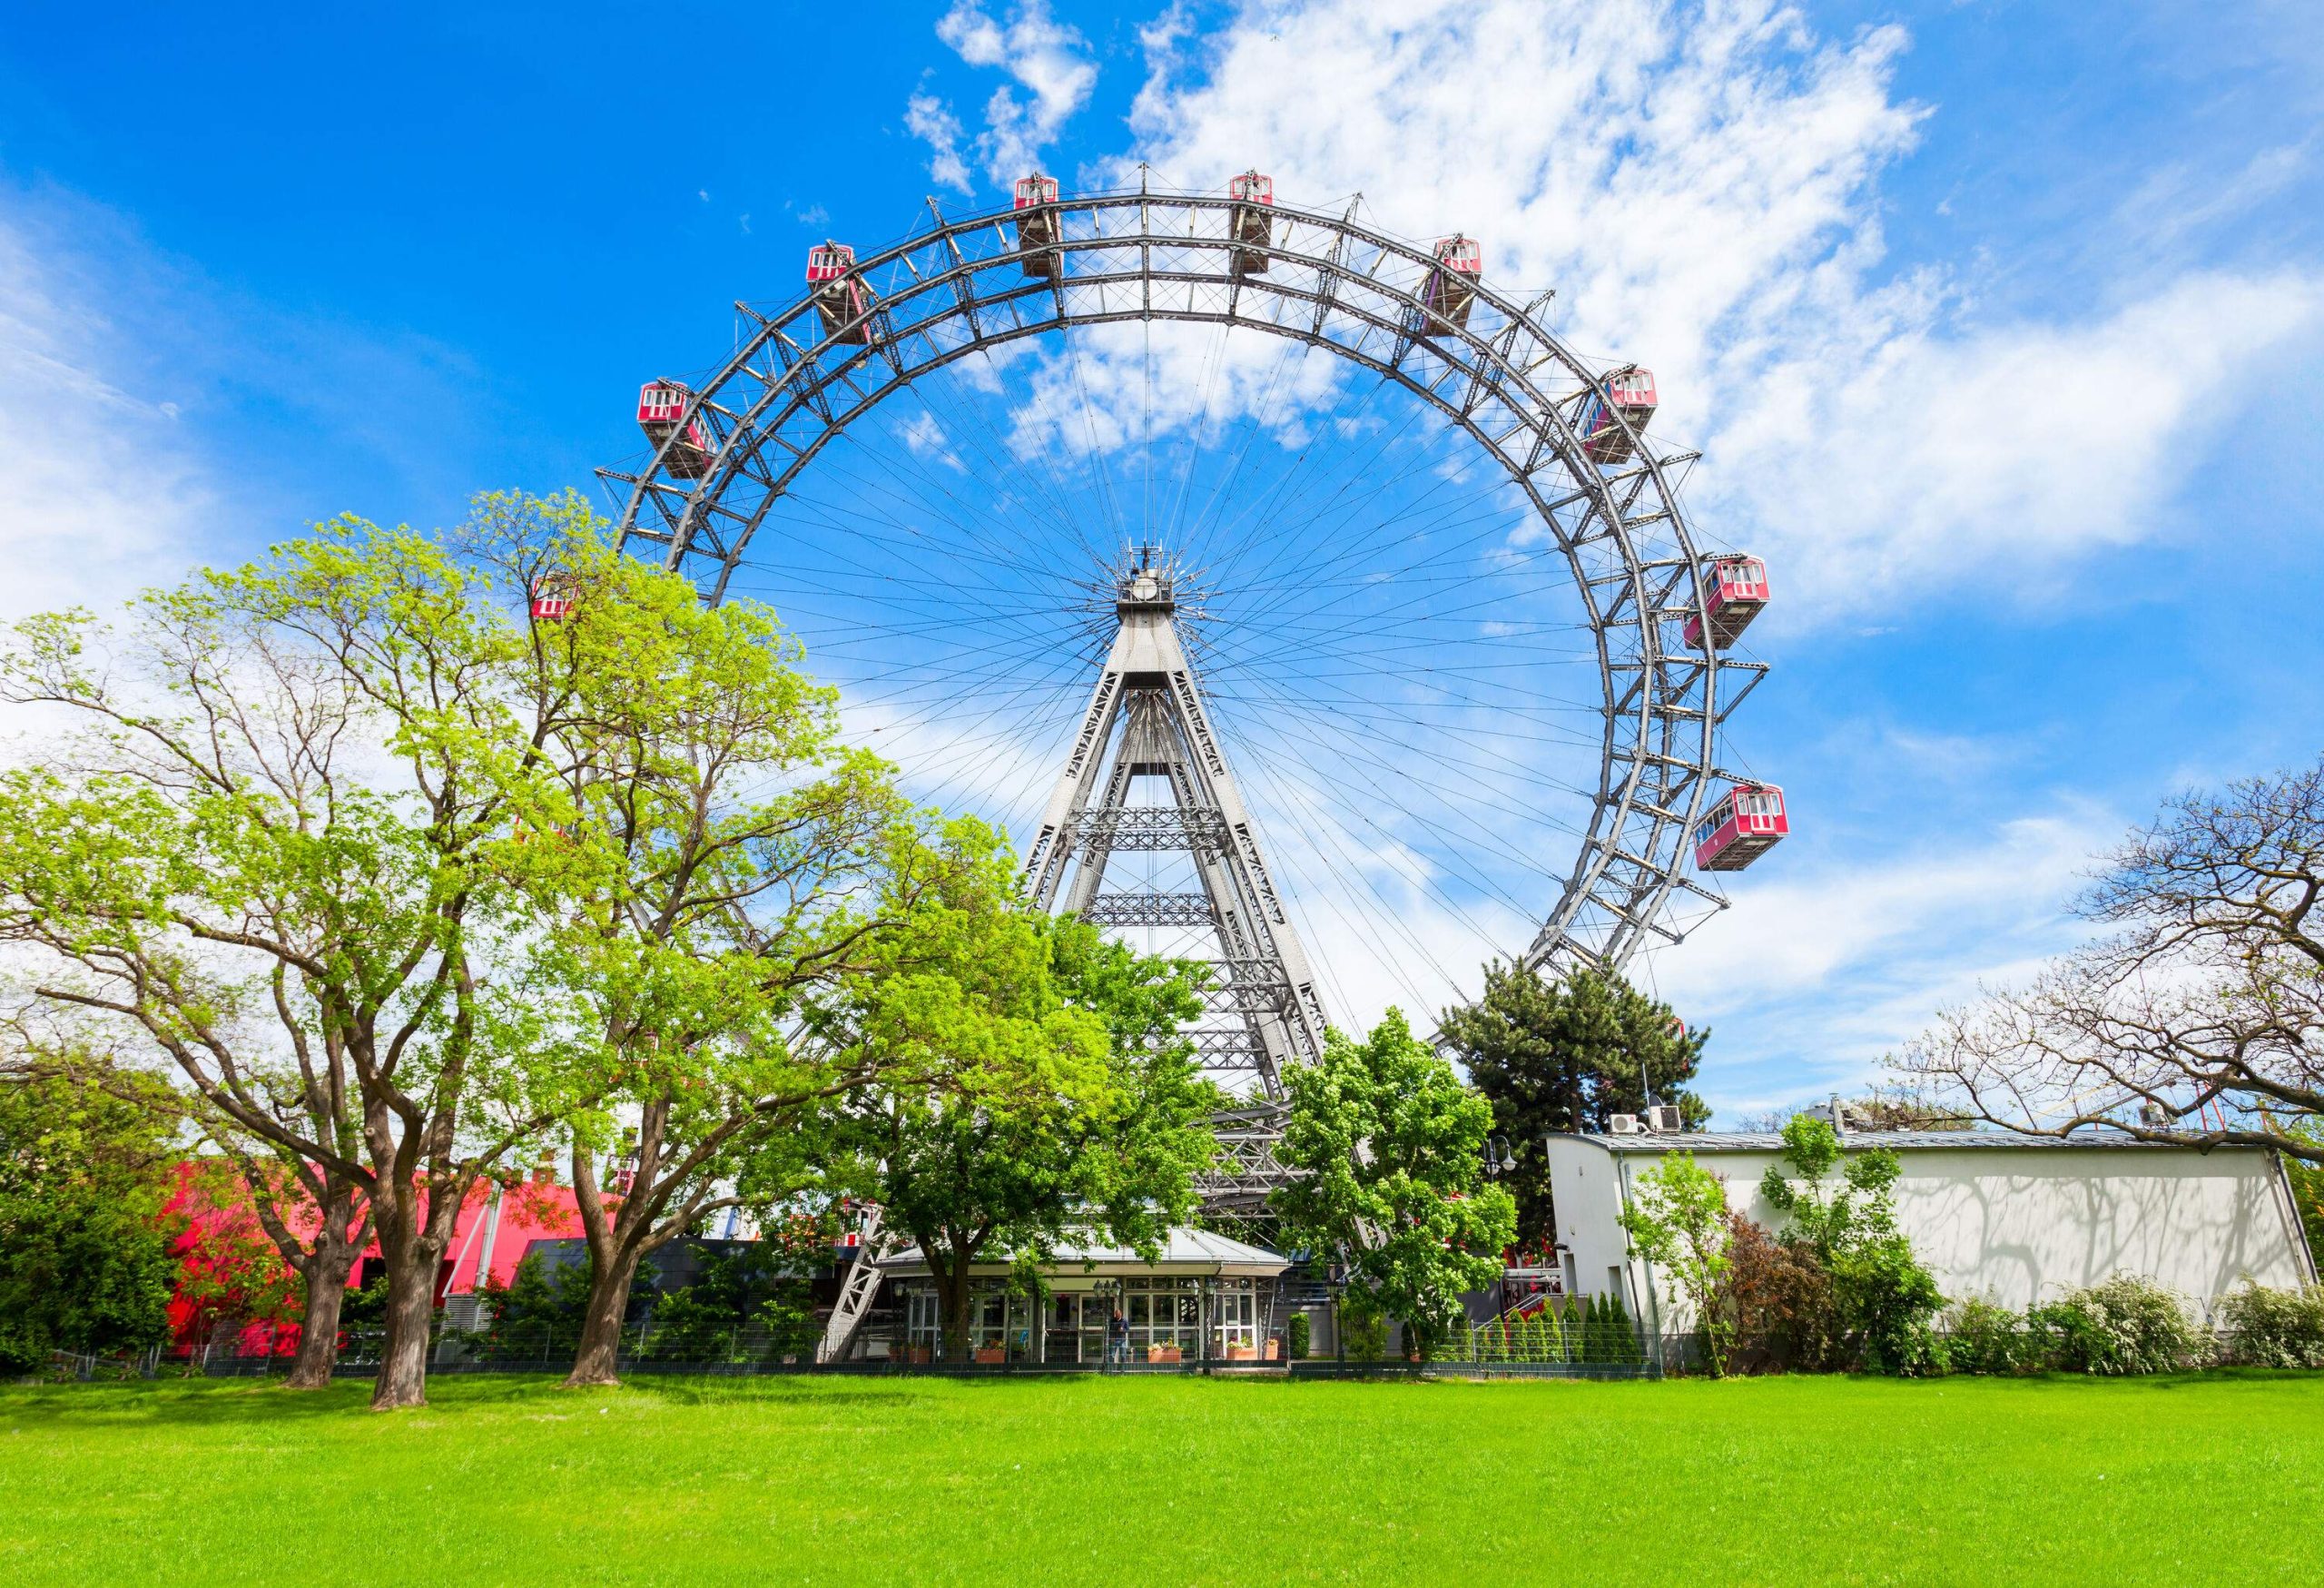 A huge Ferris wheel in a park soaring into the bright blue sky.